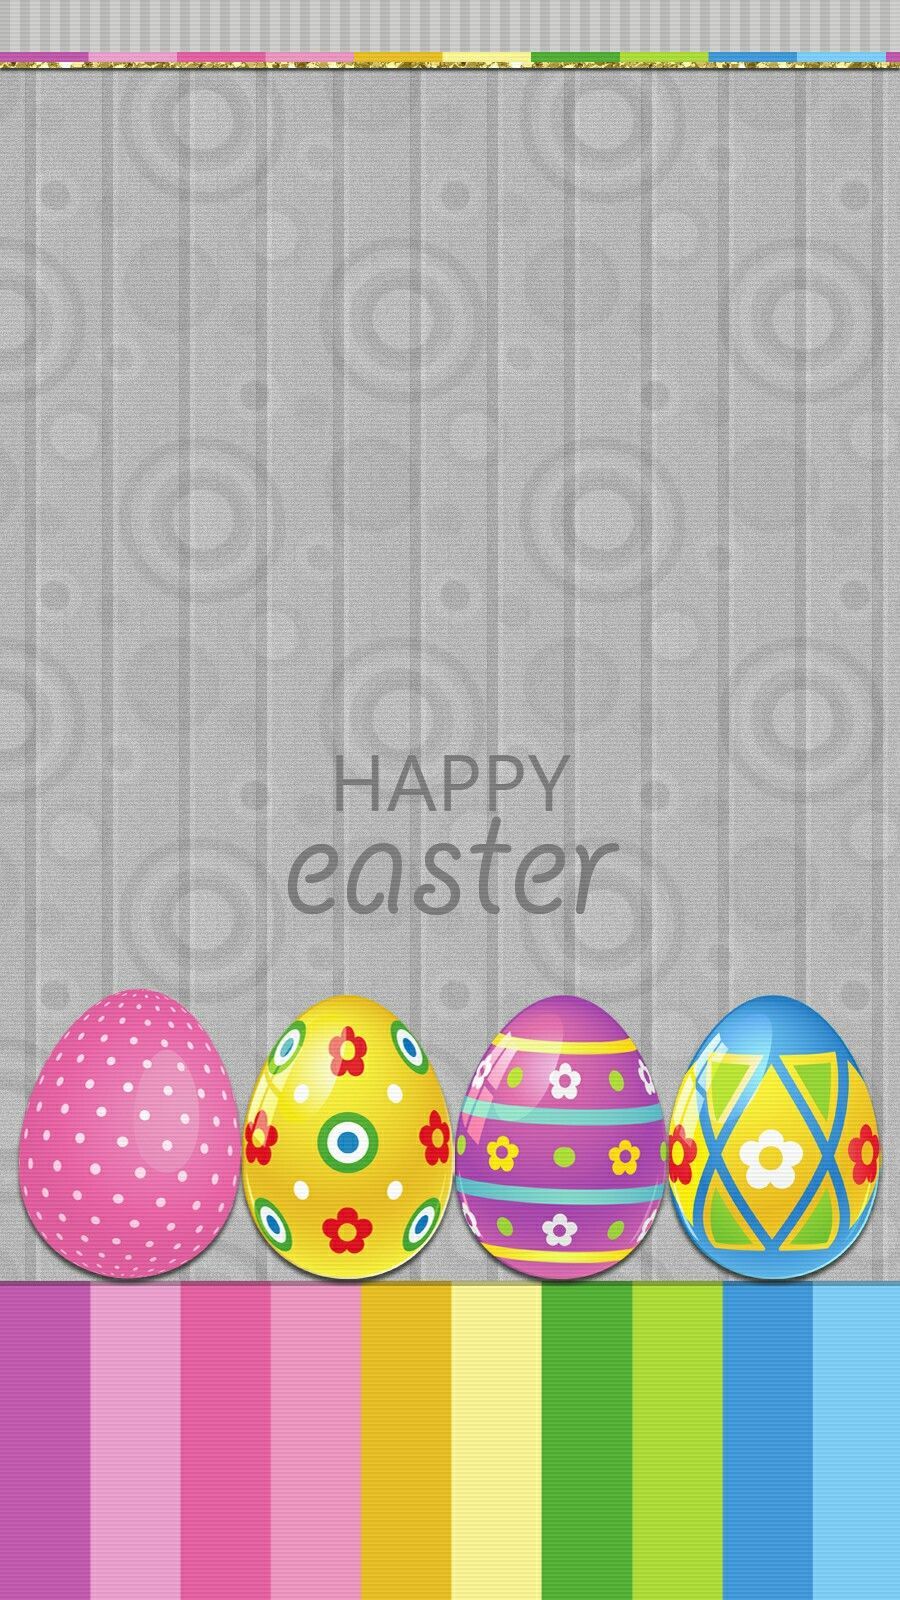 happy #easter #egg #wallpaper #iphone. Happy easter wallpaper, Easter wallpaper, Holiday wallpaper